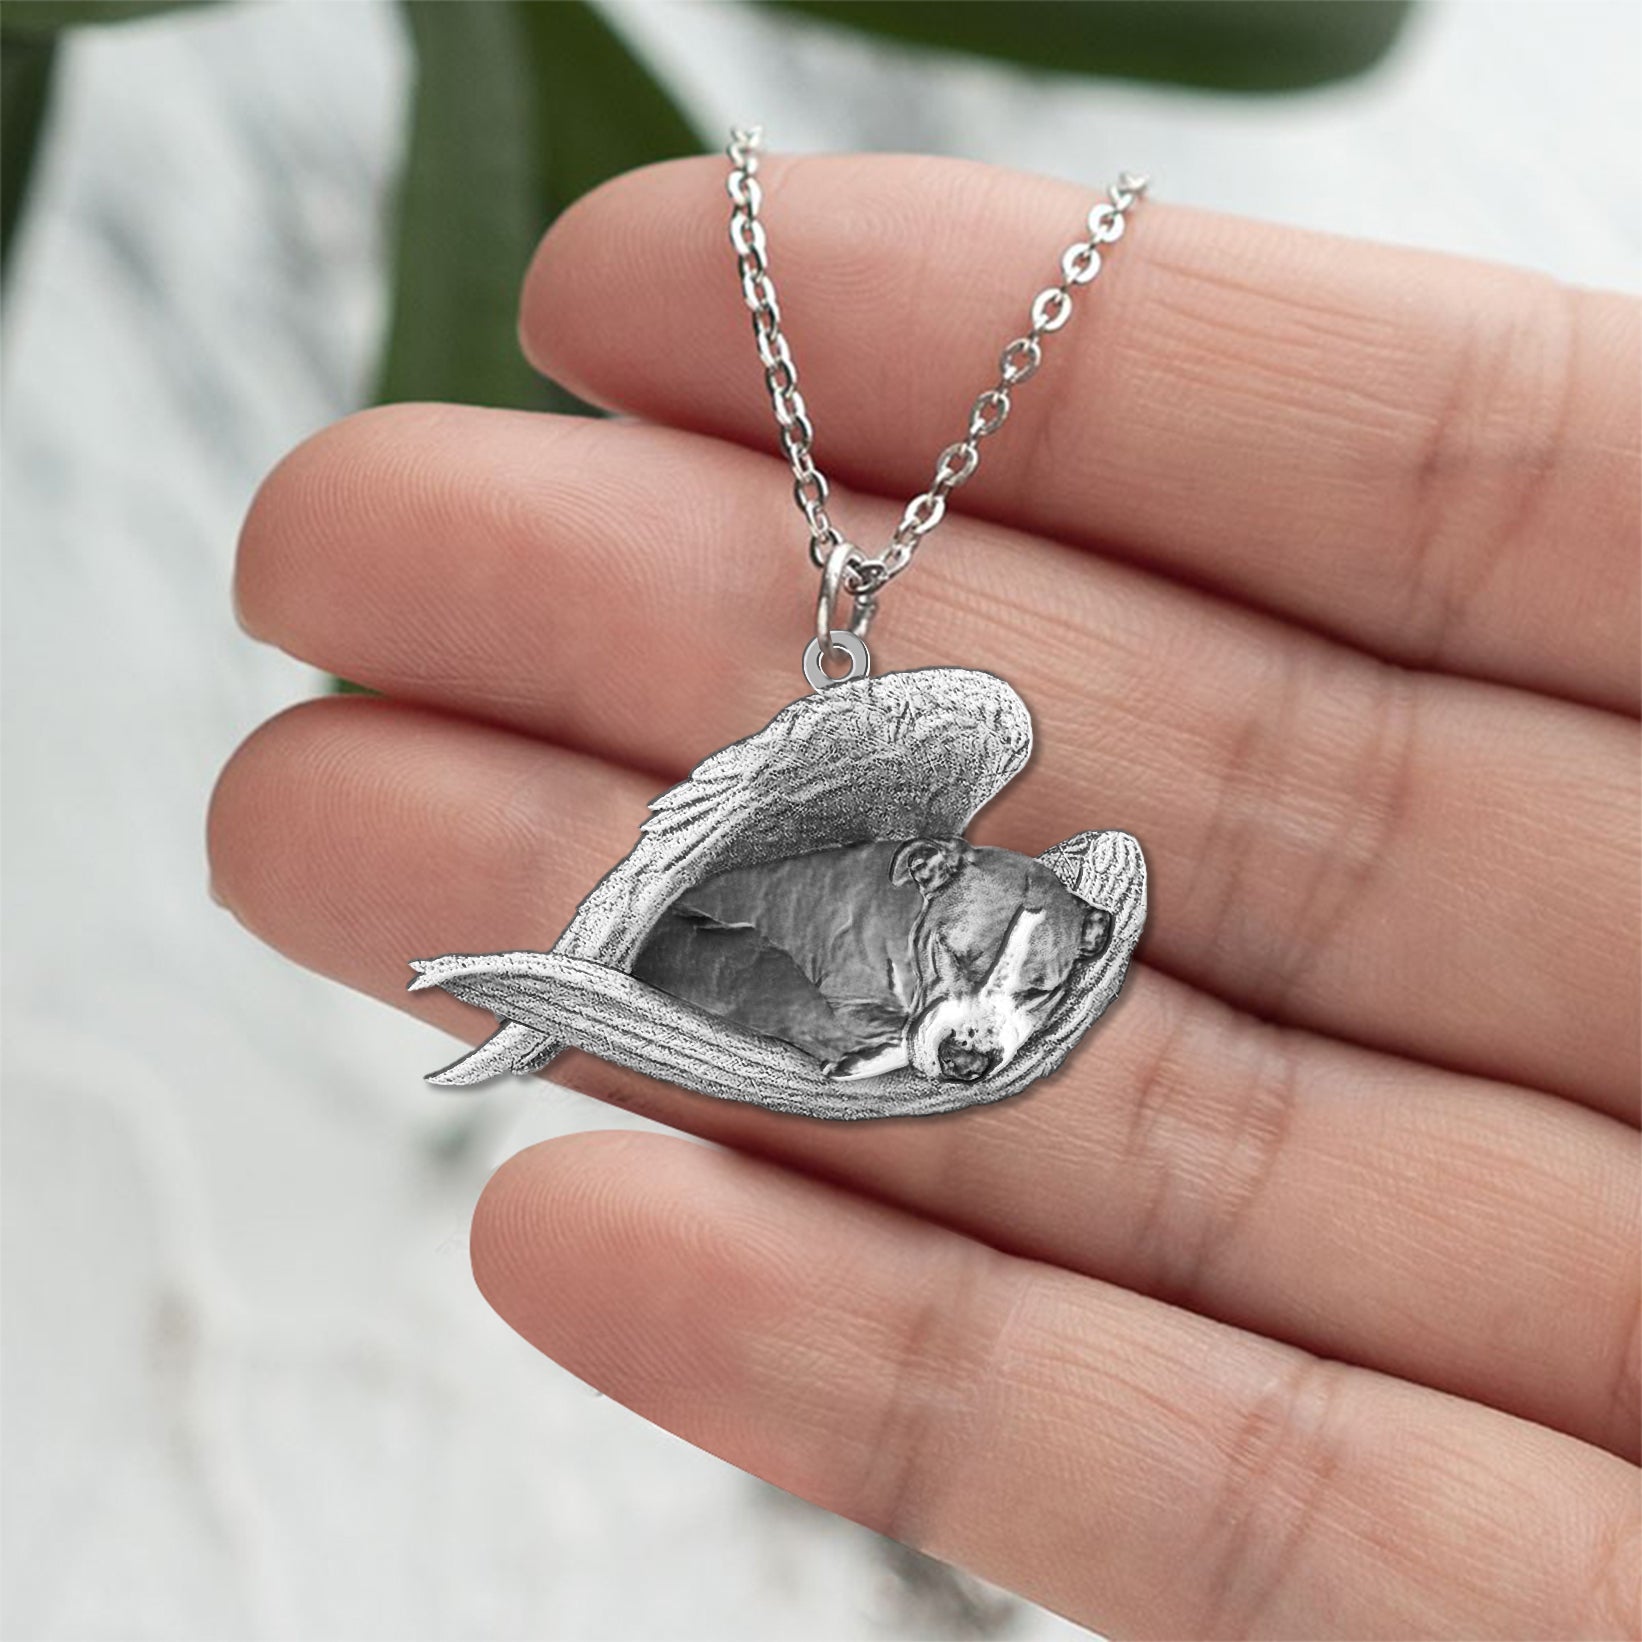 Staffordshire Bull Terrier Sleeping Angel Necklace